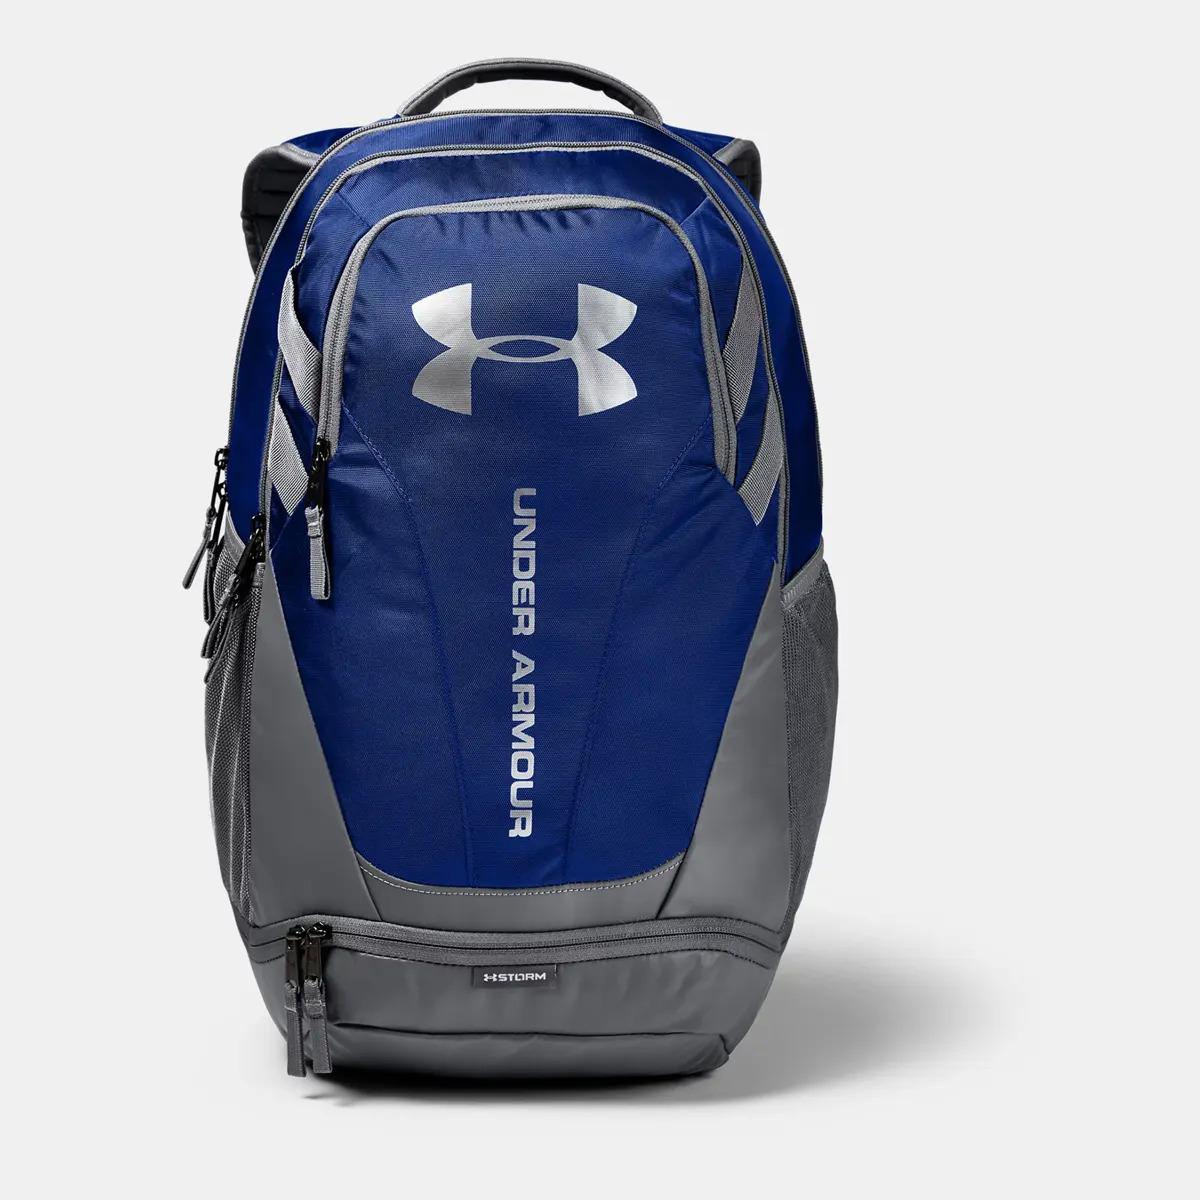 Under Armour Mens Hustle 3.0 Backpack for $18.18 Shipped